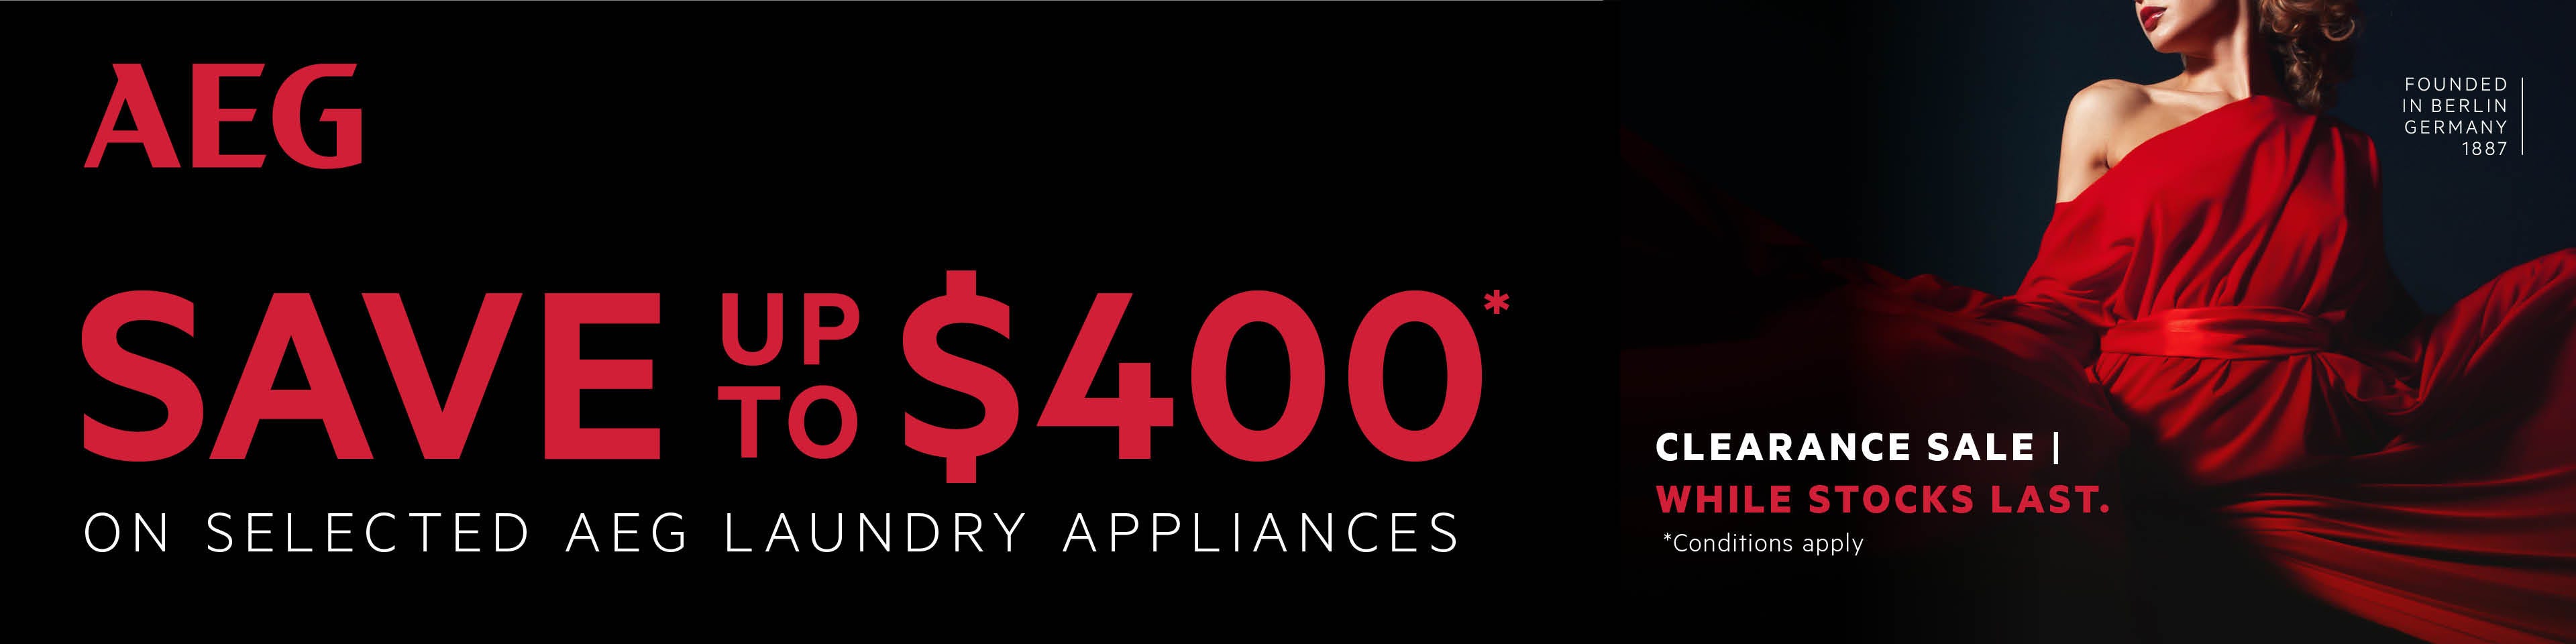 Save up to $400* on selected AEG laundry appliances - While Stocks Last. At an e&s near you.